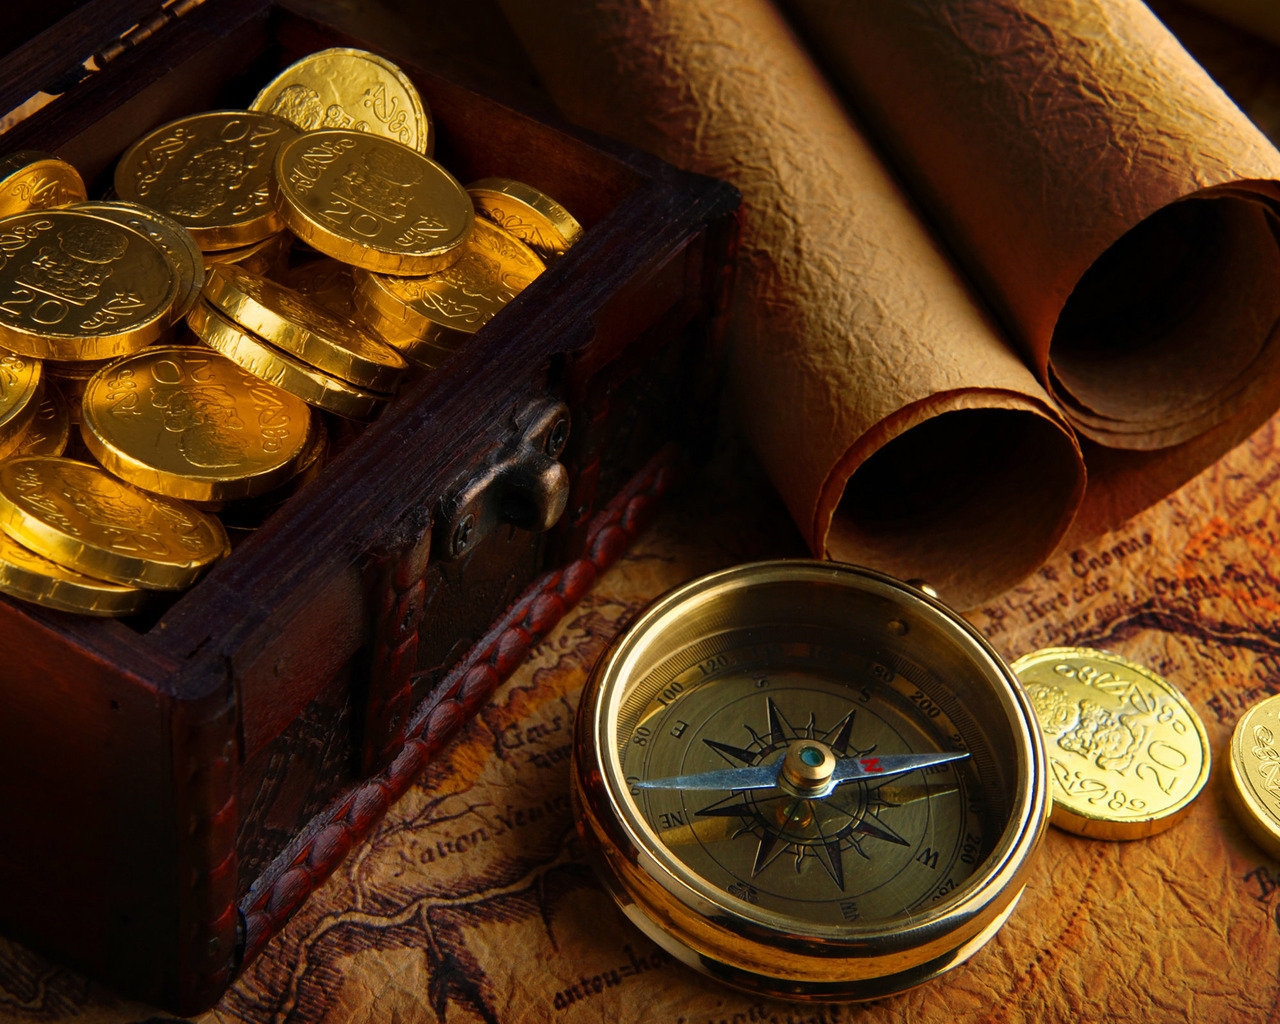 Gold Coins for 1280 x 1024 resolution